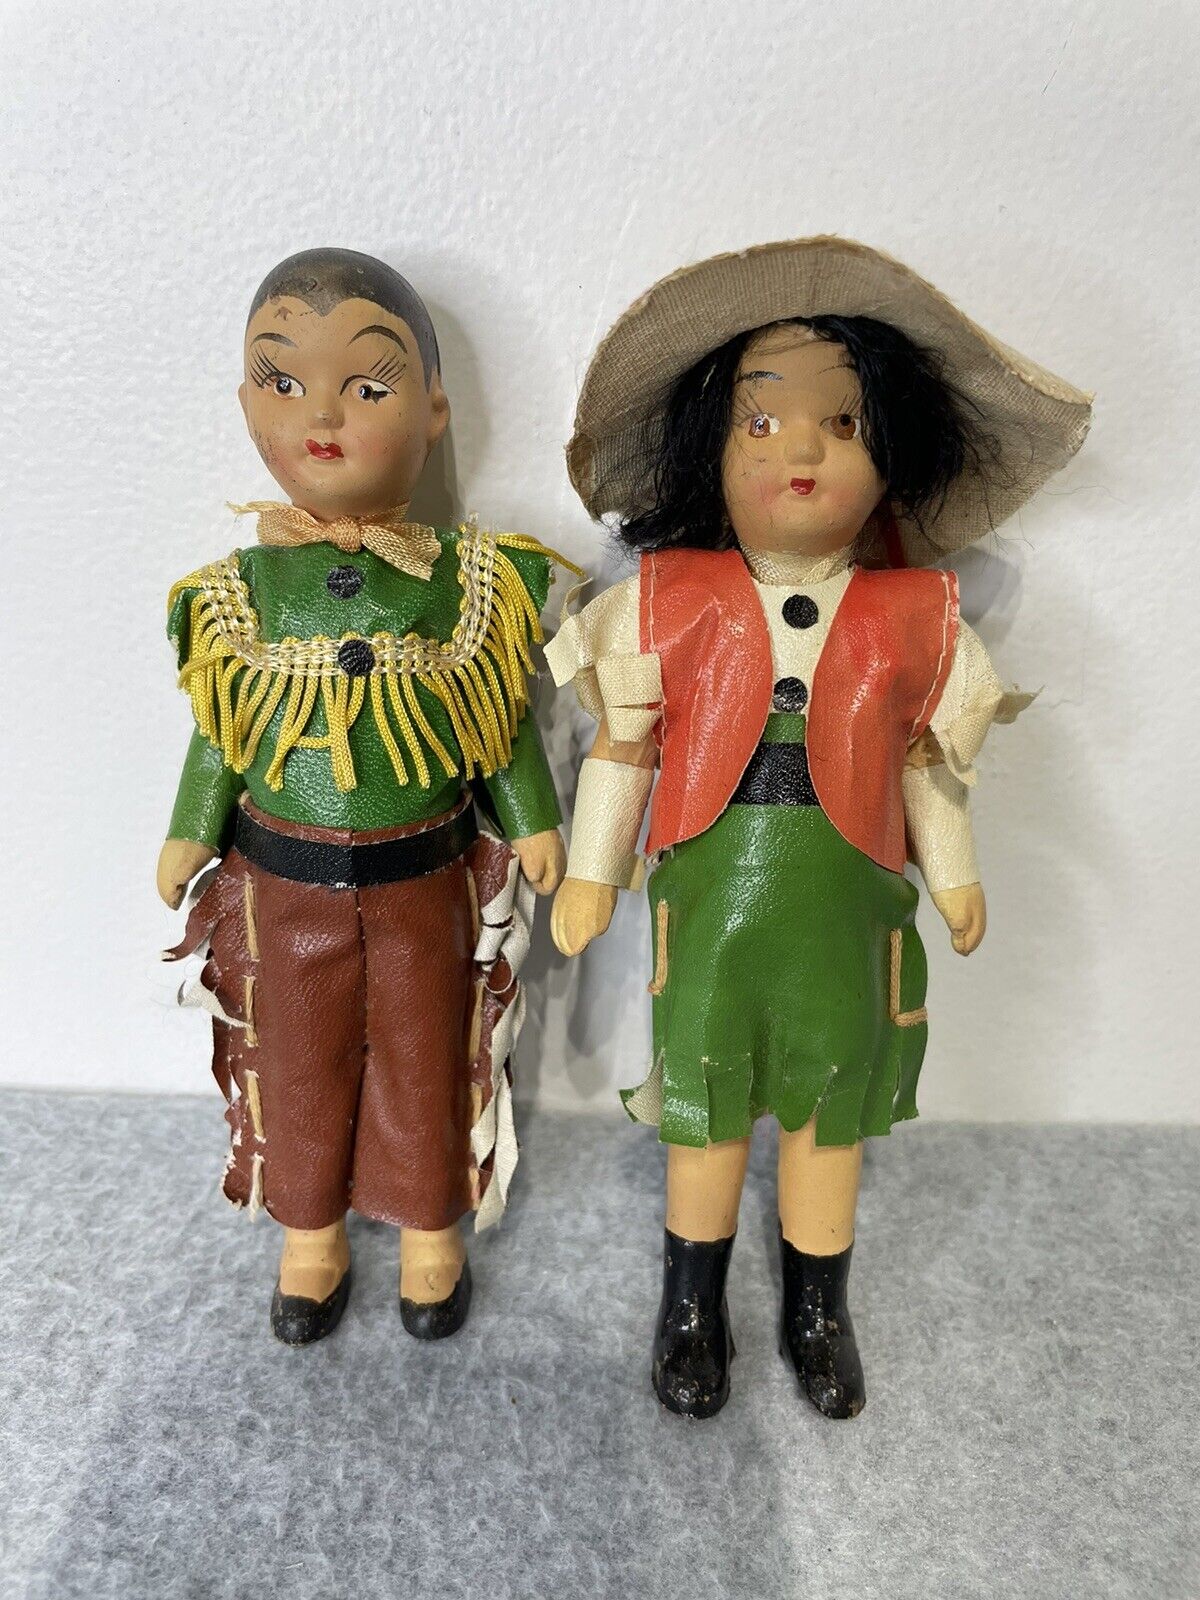 Vintage Made in Japan Mexican Dolls hand painted clay